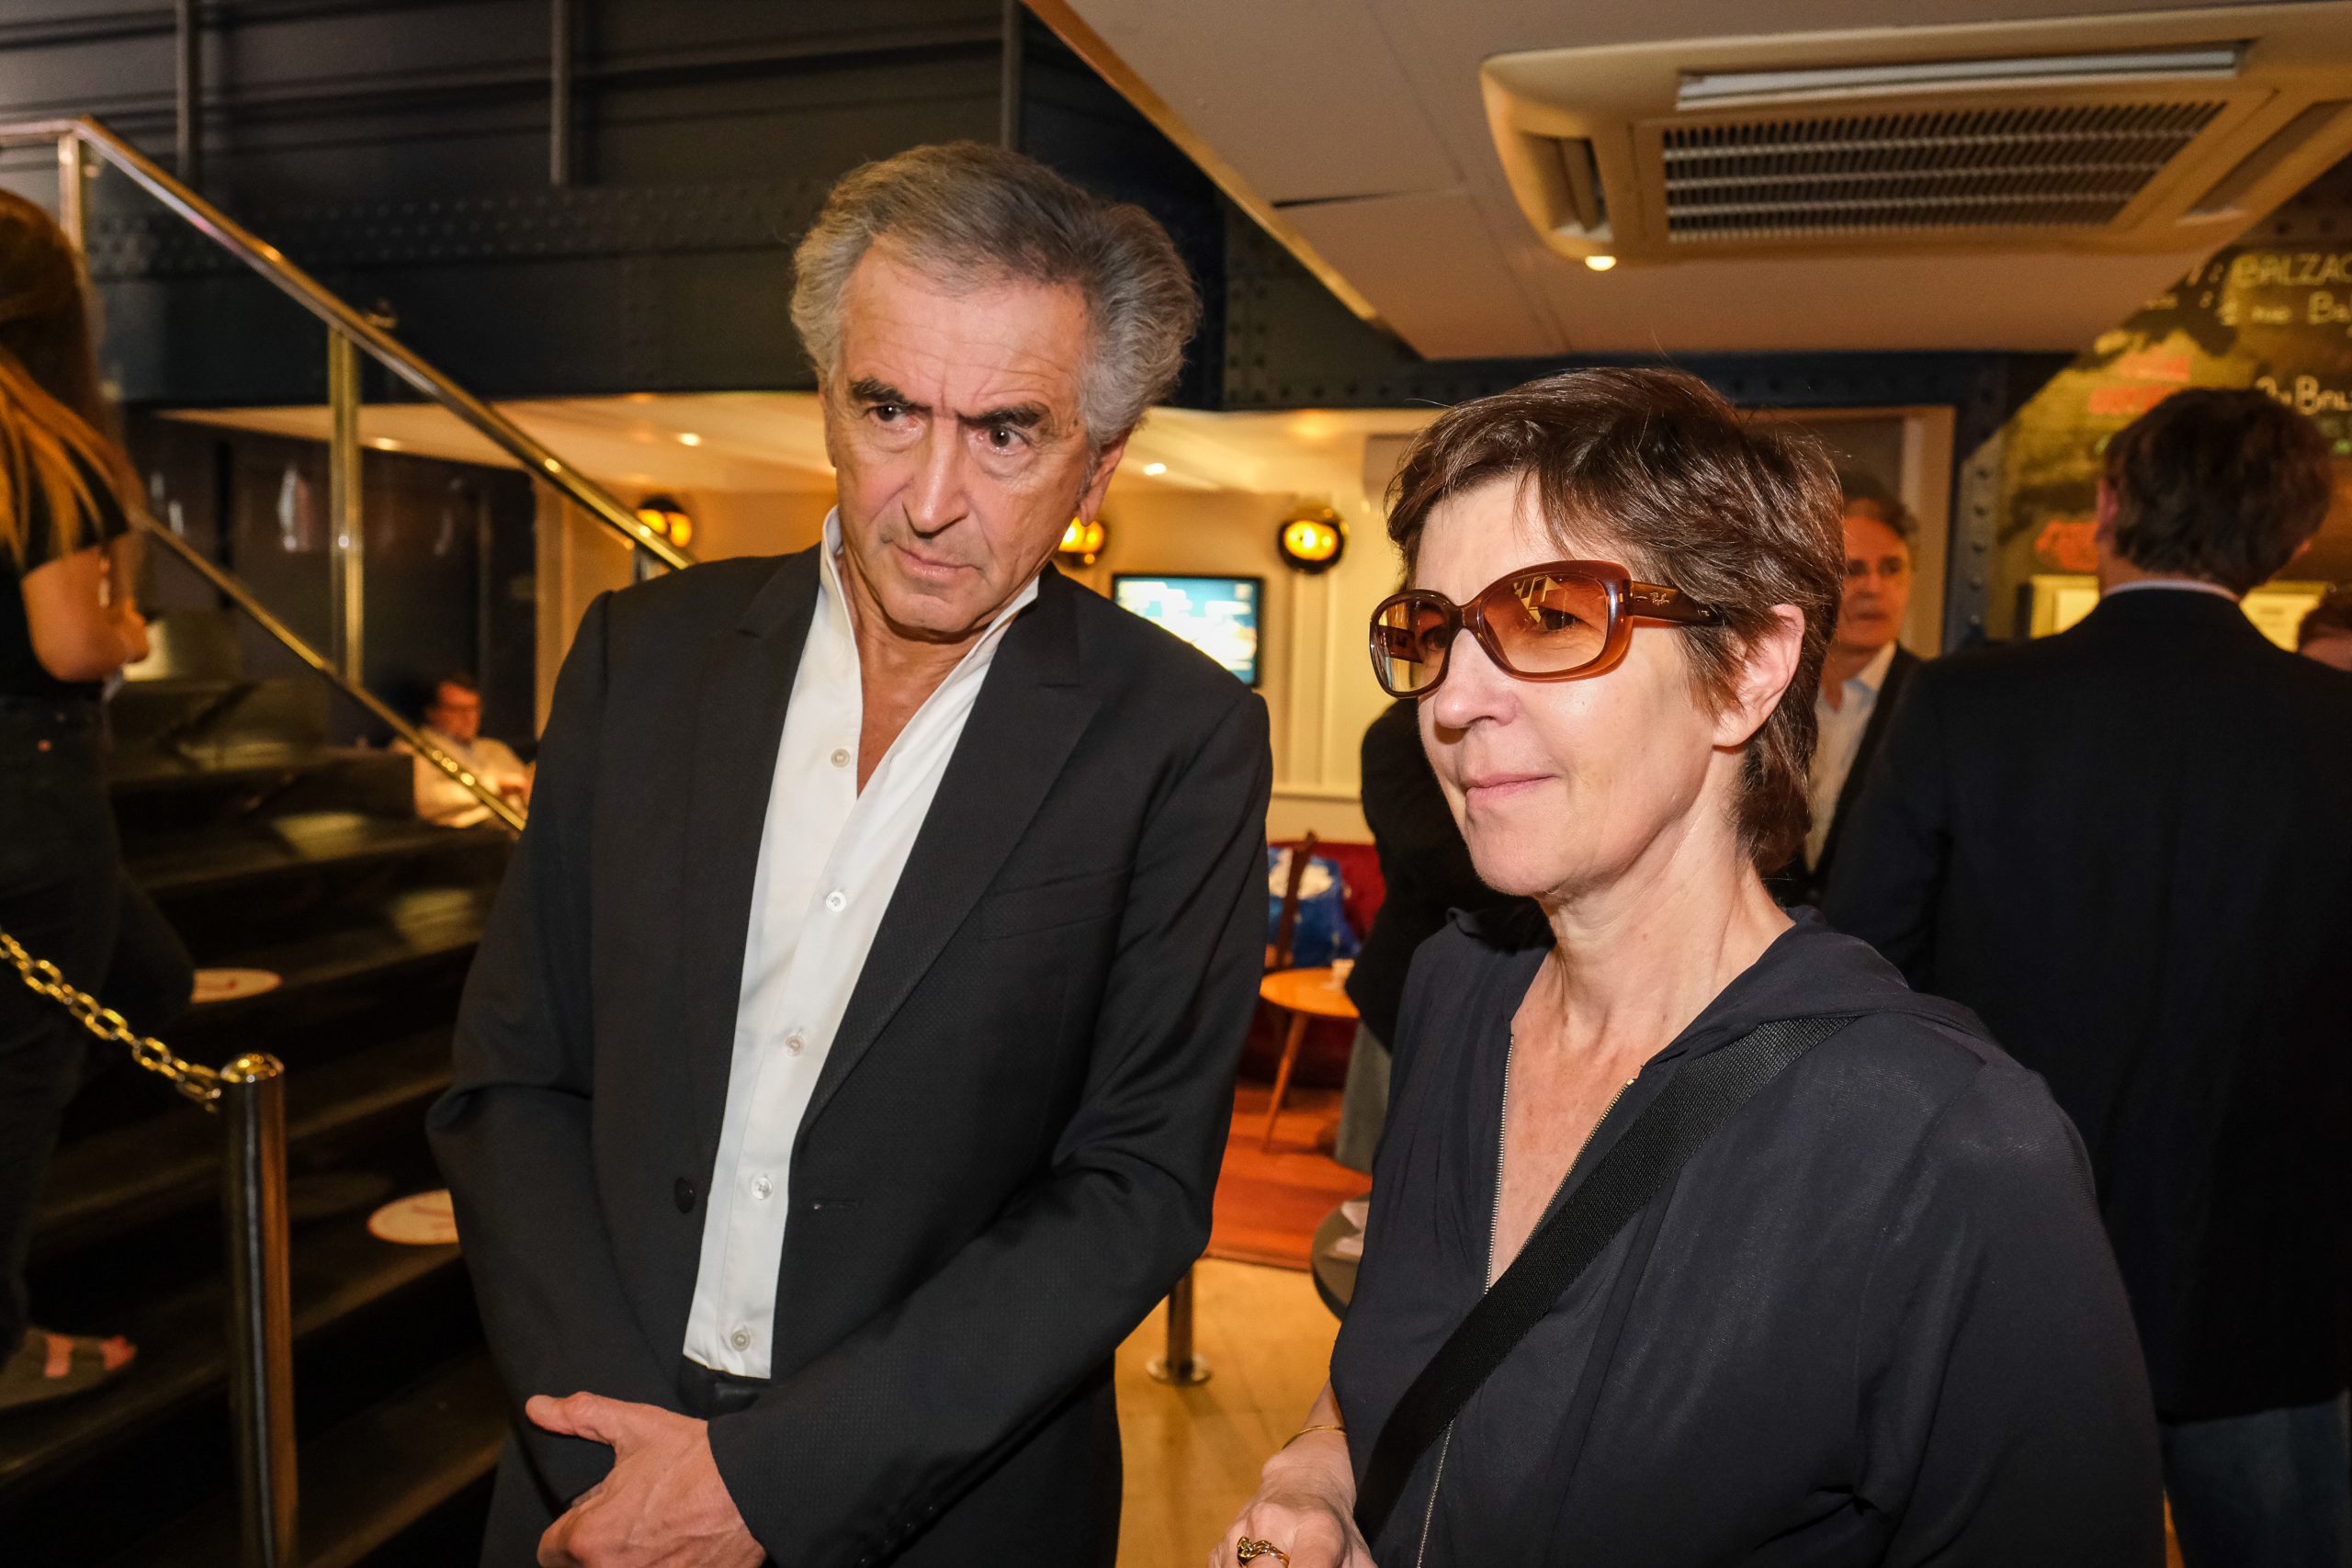 Bernard-Henri Lévy and Christine Angot at the preview of BHL's film "Why Ukraine", at the Cinema Le Balzac in Paris.